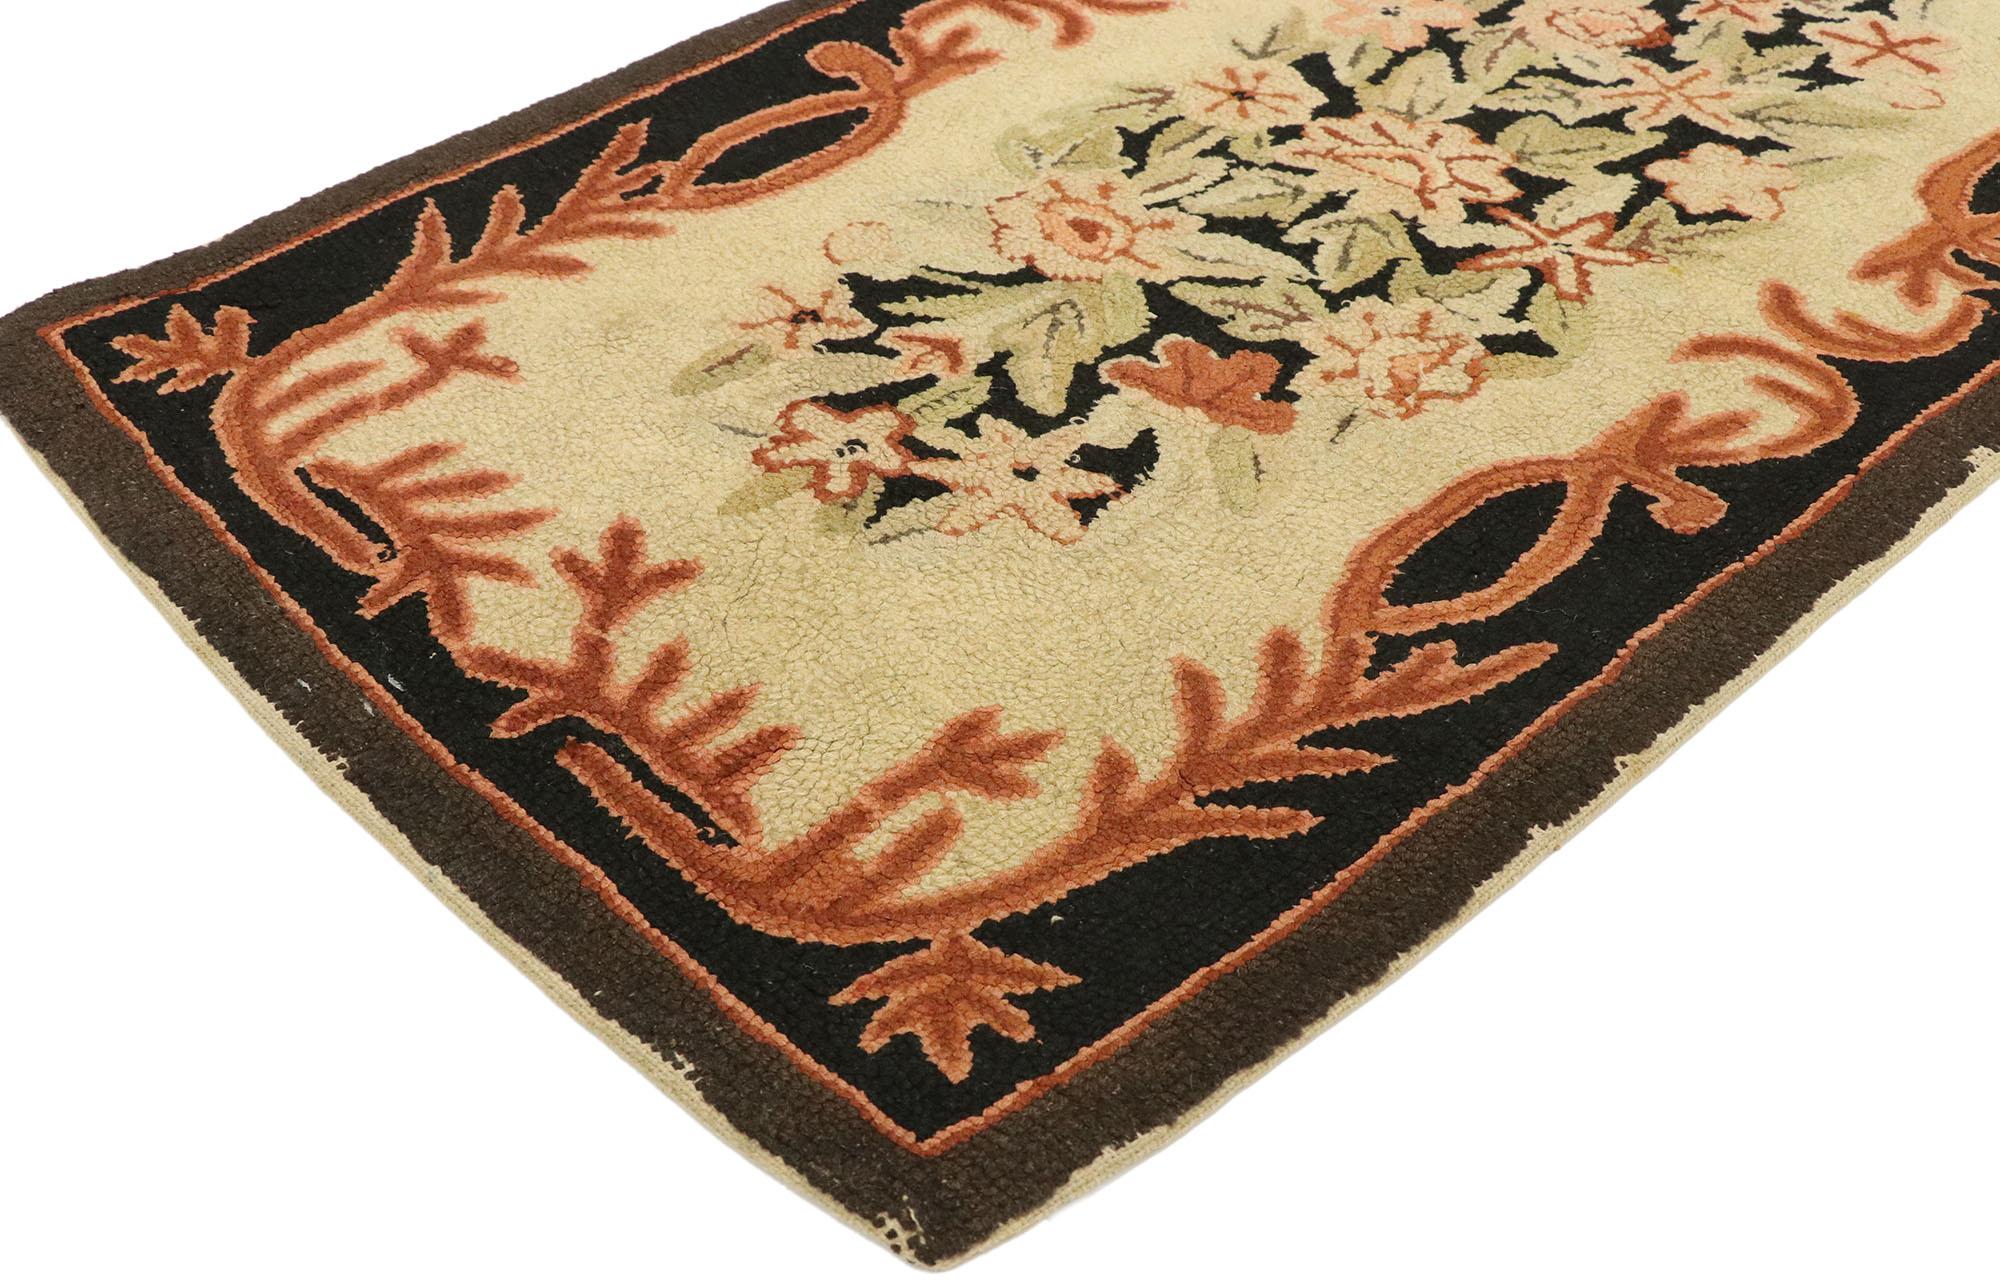 74358, antique American floral hooked rug with French Provincial style. This antique American hand hooked rug with French Provincial style features a decorative floral bouquet framed with an opulent frondescence border. Displaying a universal appeal